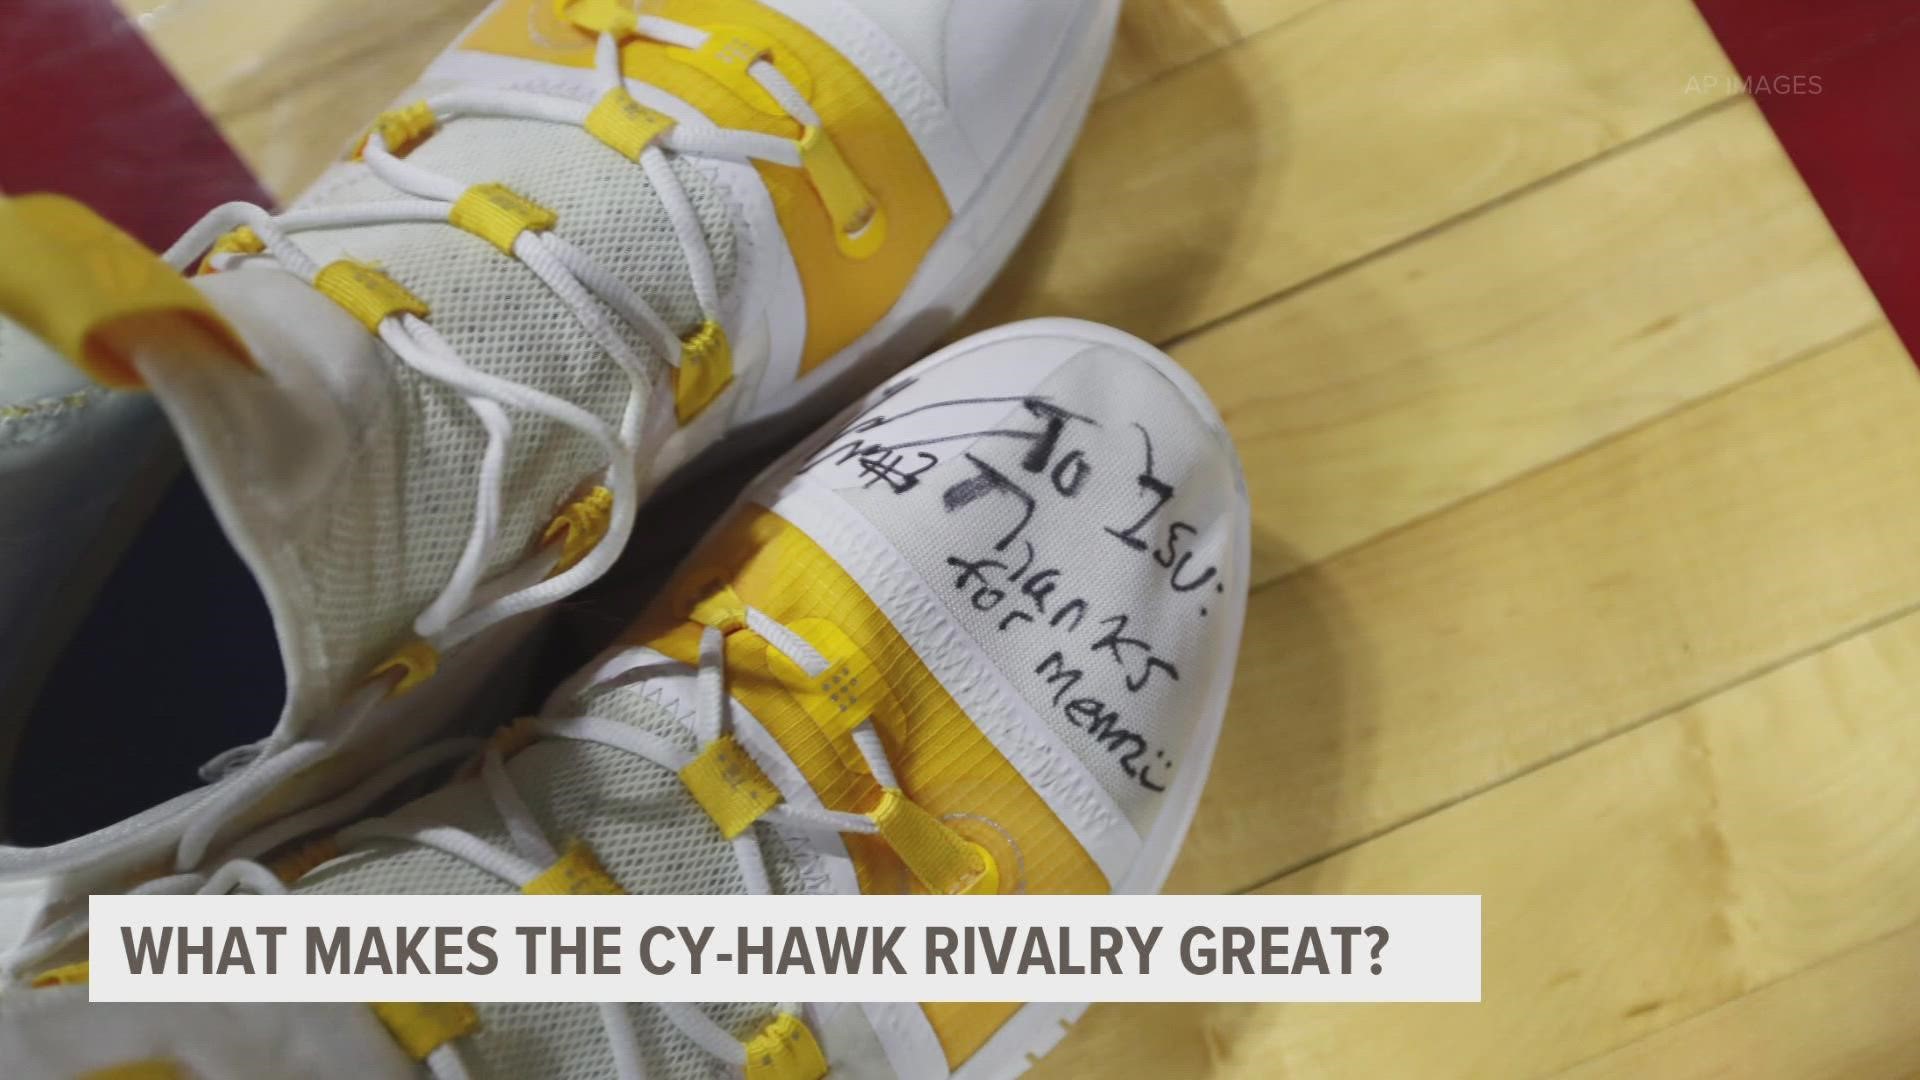 The Cy-Hawk rivalry has made for some great moments throughout its history, especially when it comes to basketball. Here’s what former players had to say.